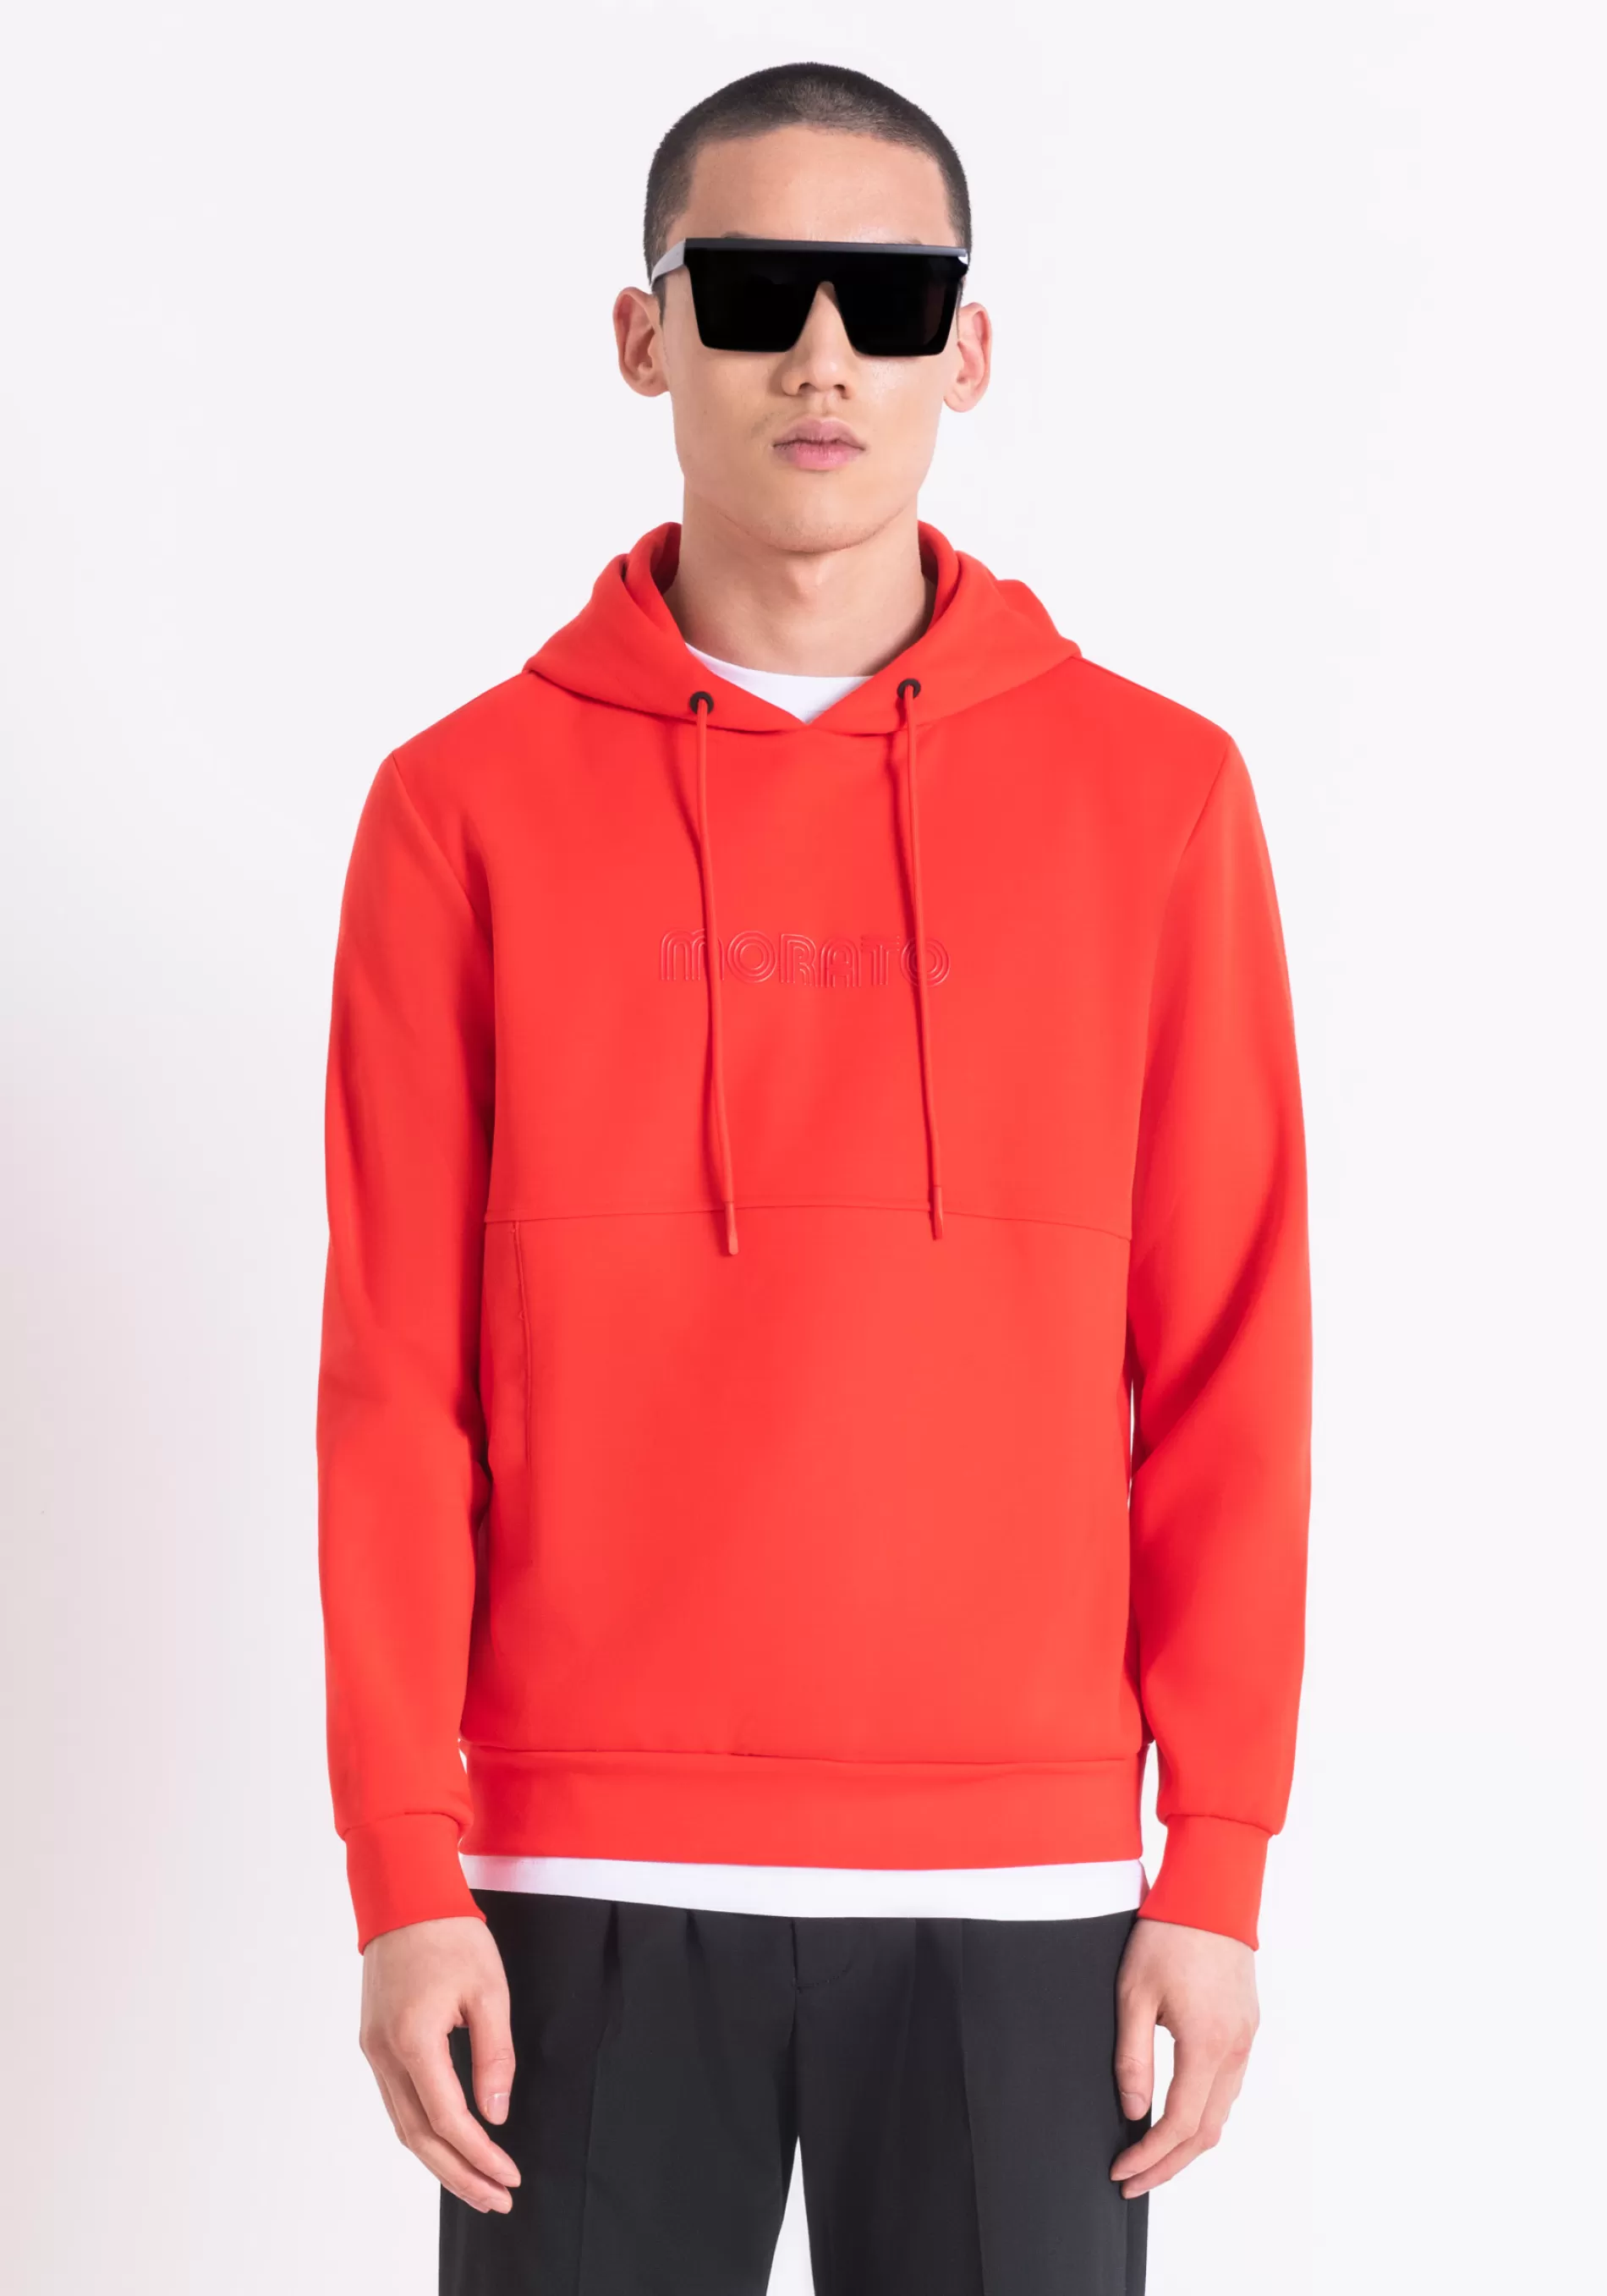 Cheap RELAXED FIT COTTON BLEND HOODIE WITH EMBOSSED LOGO Sweatshirts